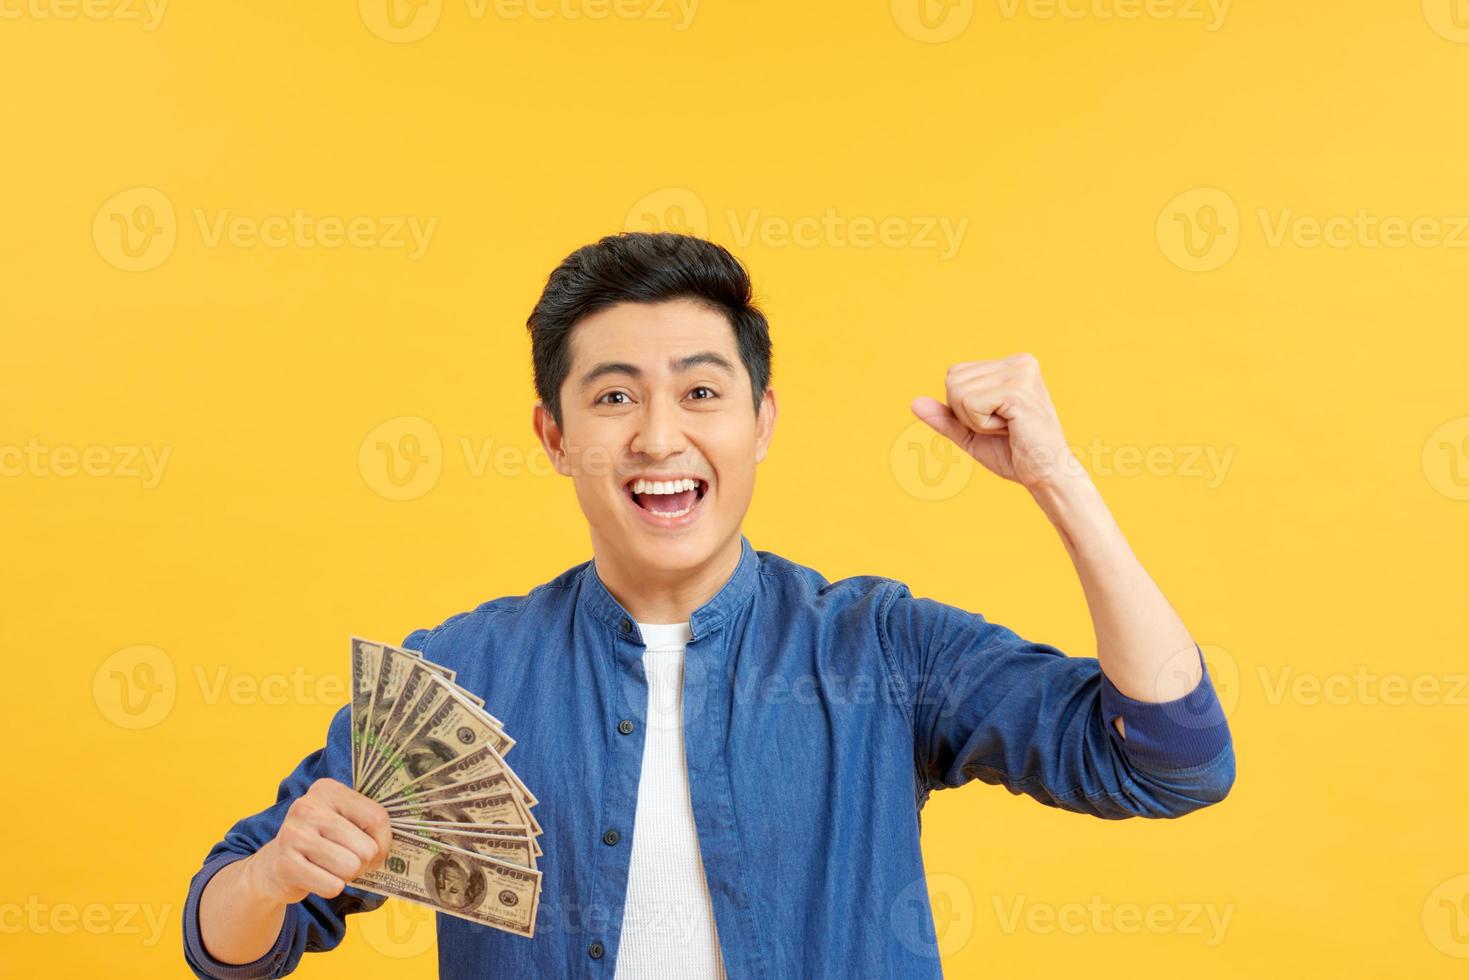 Closeup portrait, happy, excited successful senior lucky elderly man holding money dollar bills in hand isolated yellow background. Positive emotion facial expression feeling. Financial reward savings photo